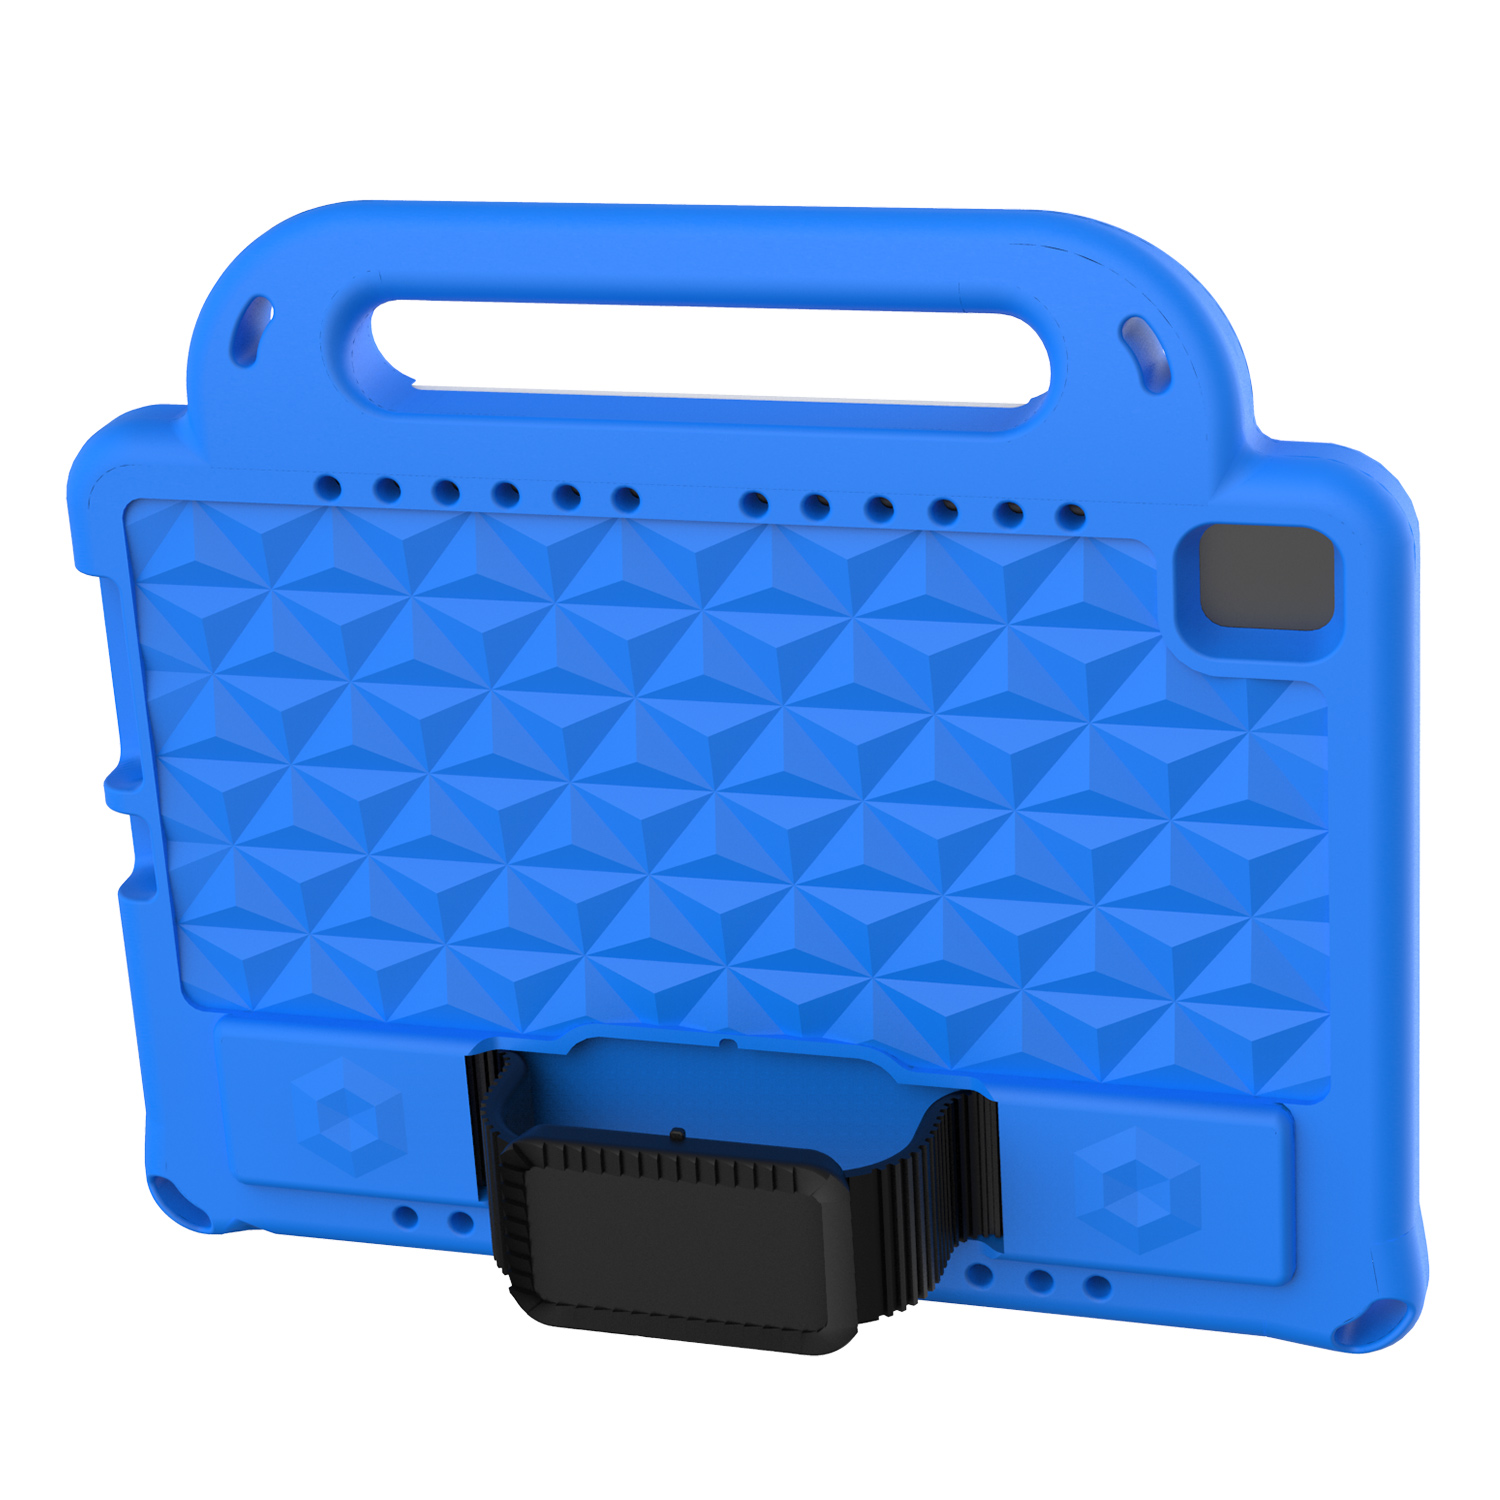 Shockproof Rugged Cover With Hand Strap Tablet Case For MediaPad M5 10.8Inch